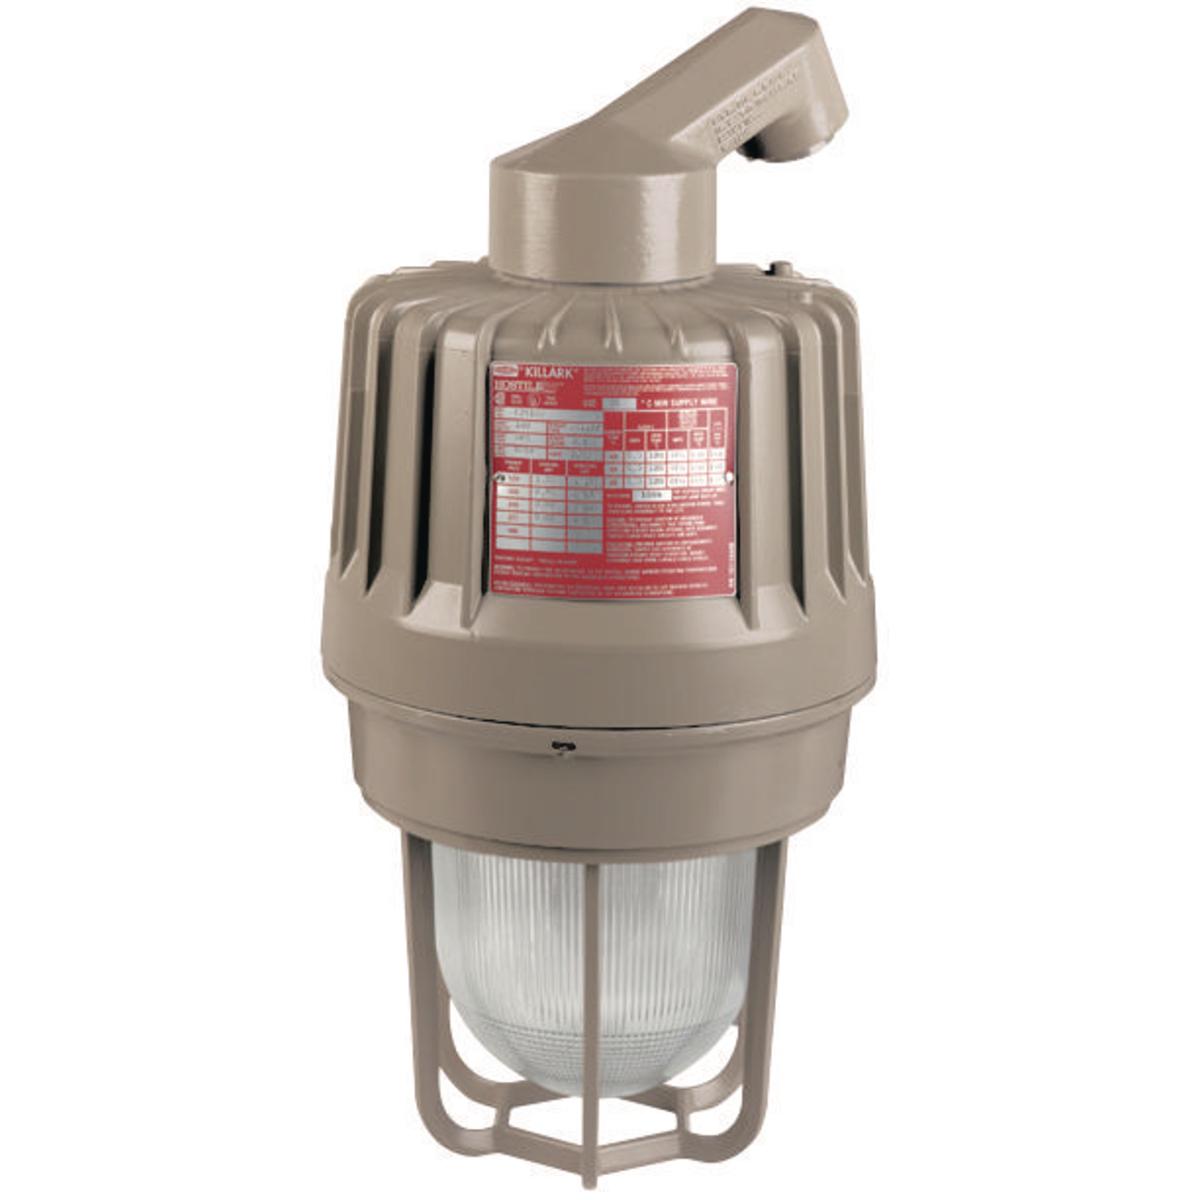 Hubbell EZP250D4G 250W Quadri-Volt Pulse-Start Metal Halide 1-1/4" Stanchion Mount with Guard  ; Three light sources – High Pressure Sodium (50-400W), Metal Halide (70-400W) and Pulse Start Metal Halide (175-400W) ; Mounting choice –Pendant, ceiling, 25˚ stanchion or 90˚ w